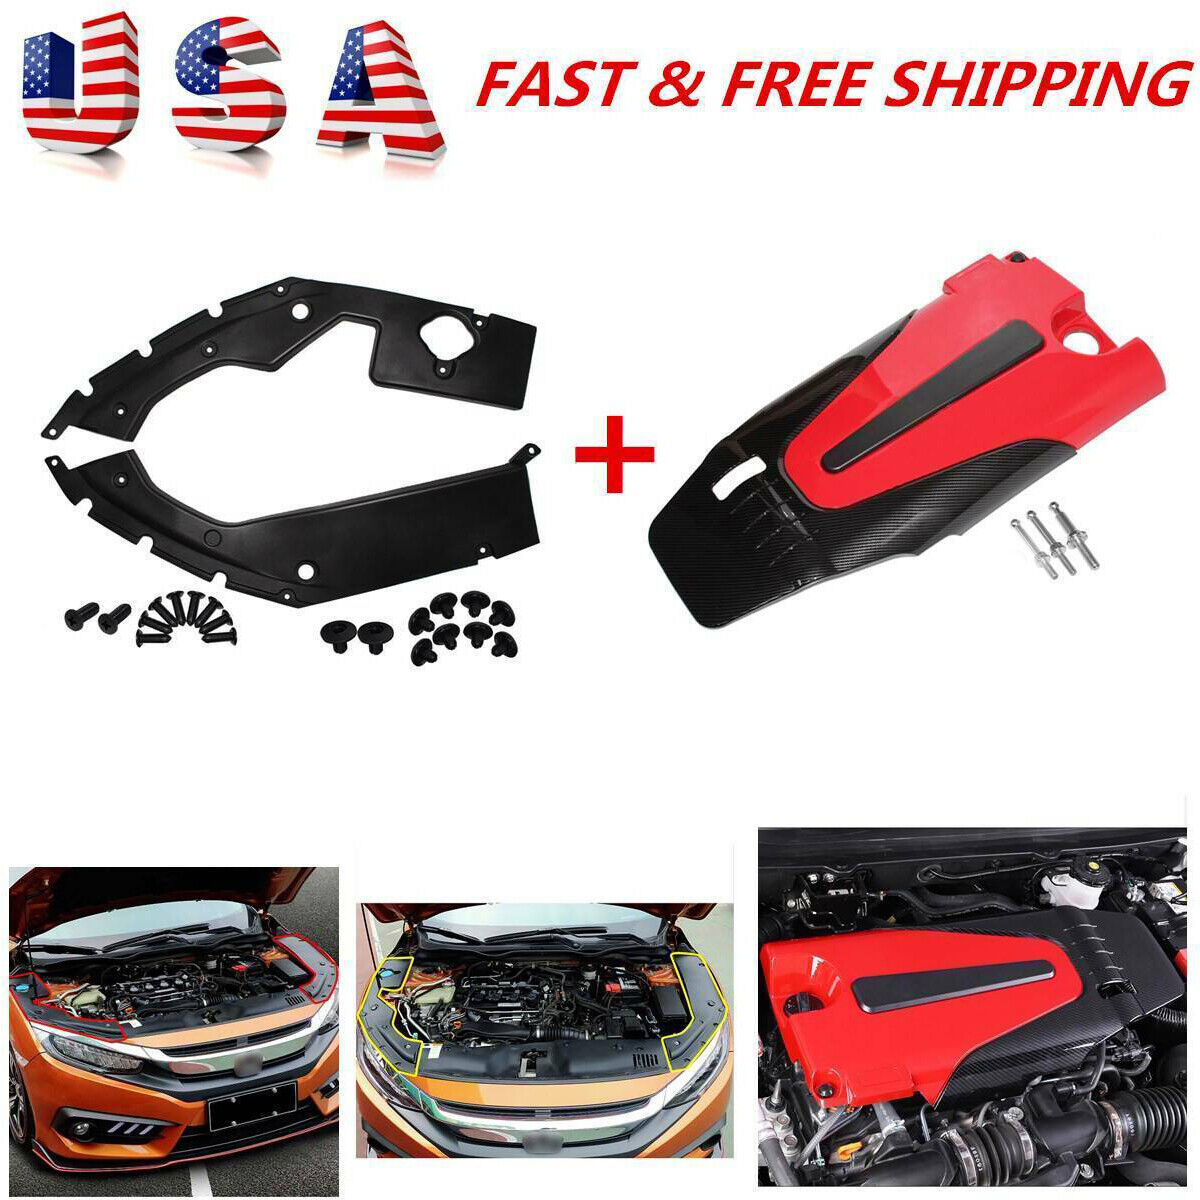 Auto Engine Cover Leaf Plate Cover ABS For 2016-2021 10TH Gen Honda Civic 2019